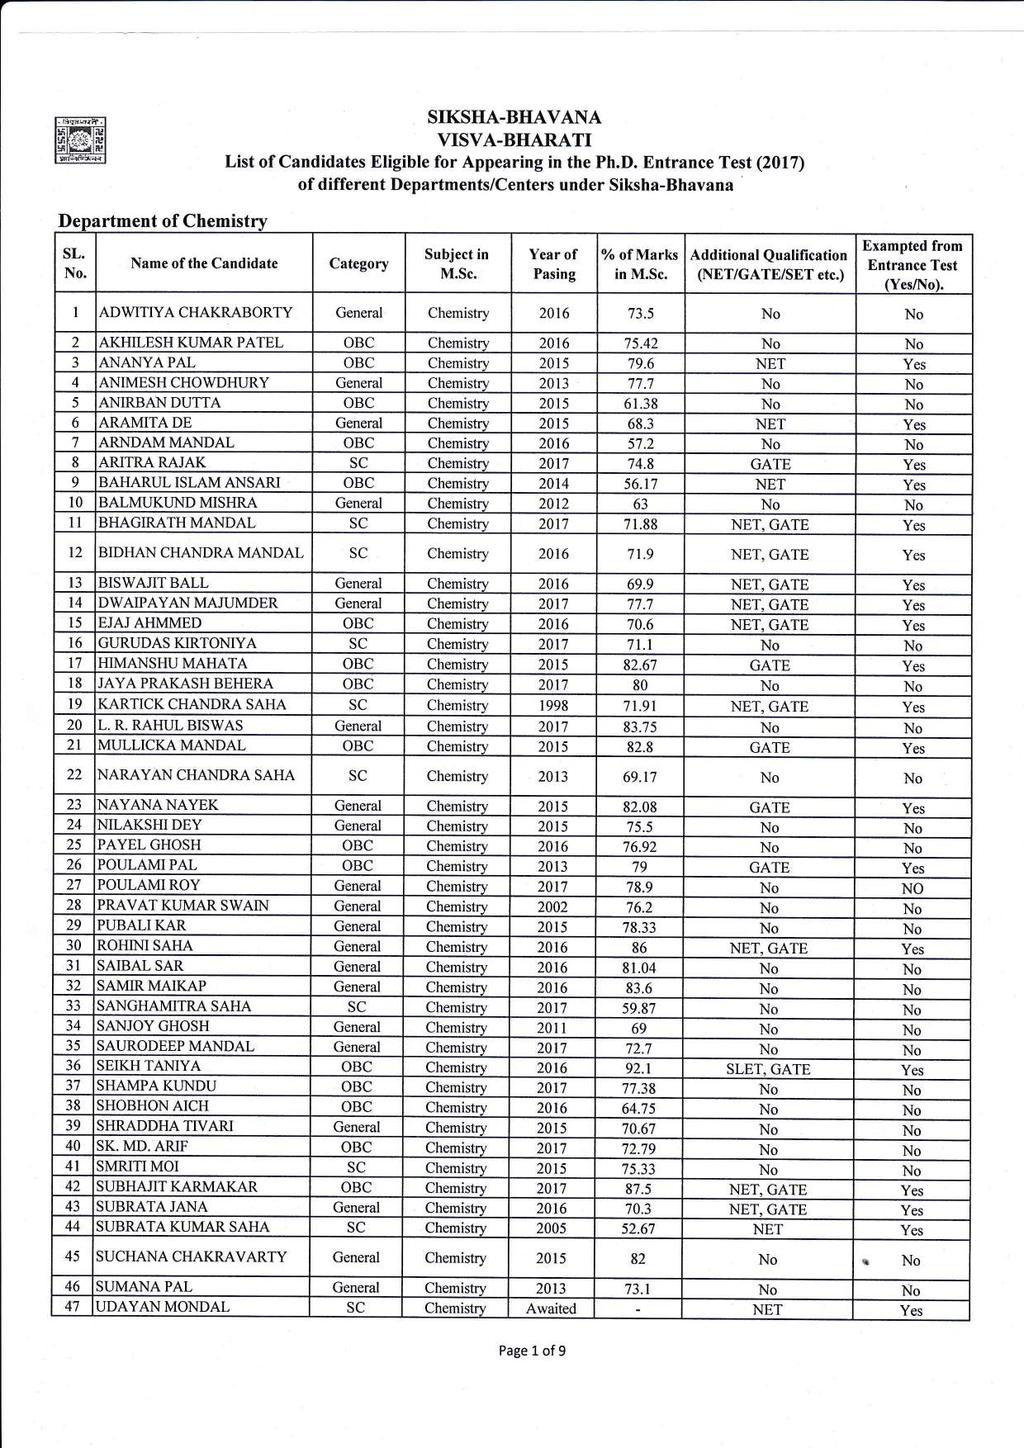 SIKSHA-BHAVANA VISVA-BHARATI List of Candidates Eligible for Appearing in the Ph.D. (2017) of different Departments/Centers under Siksha-Bhavana rtment of Chemist sl. in Additional Qualification (/1.